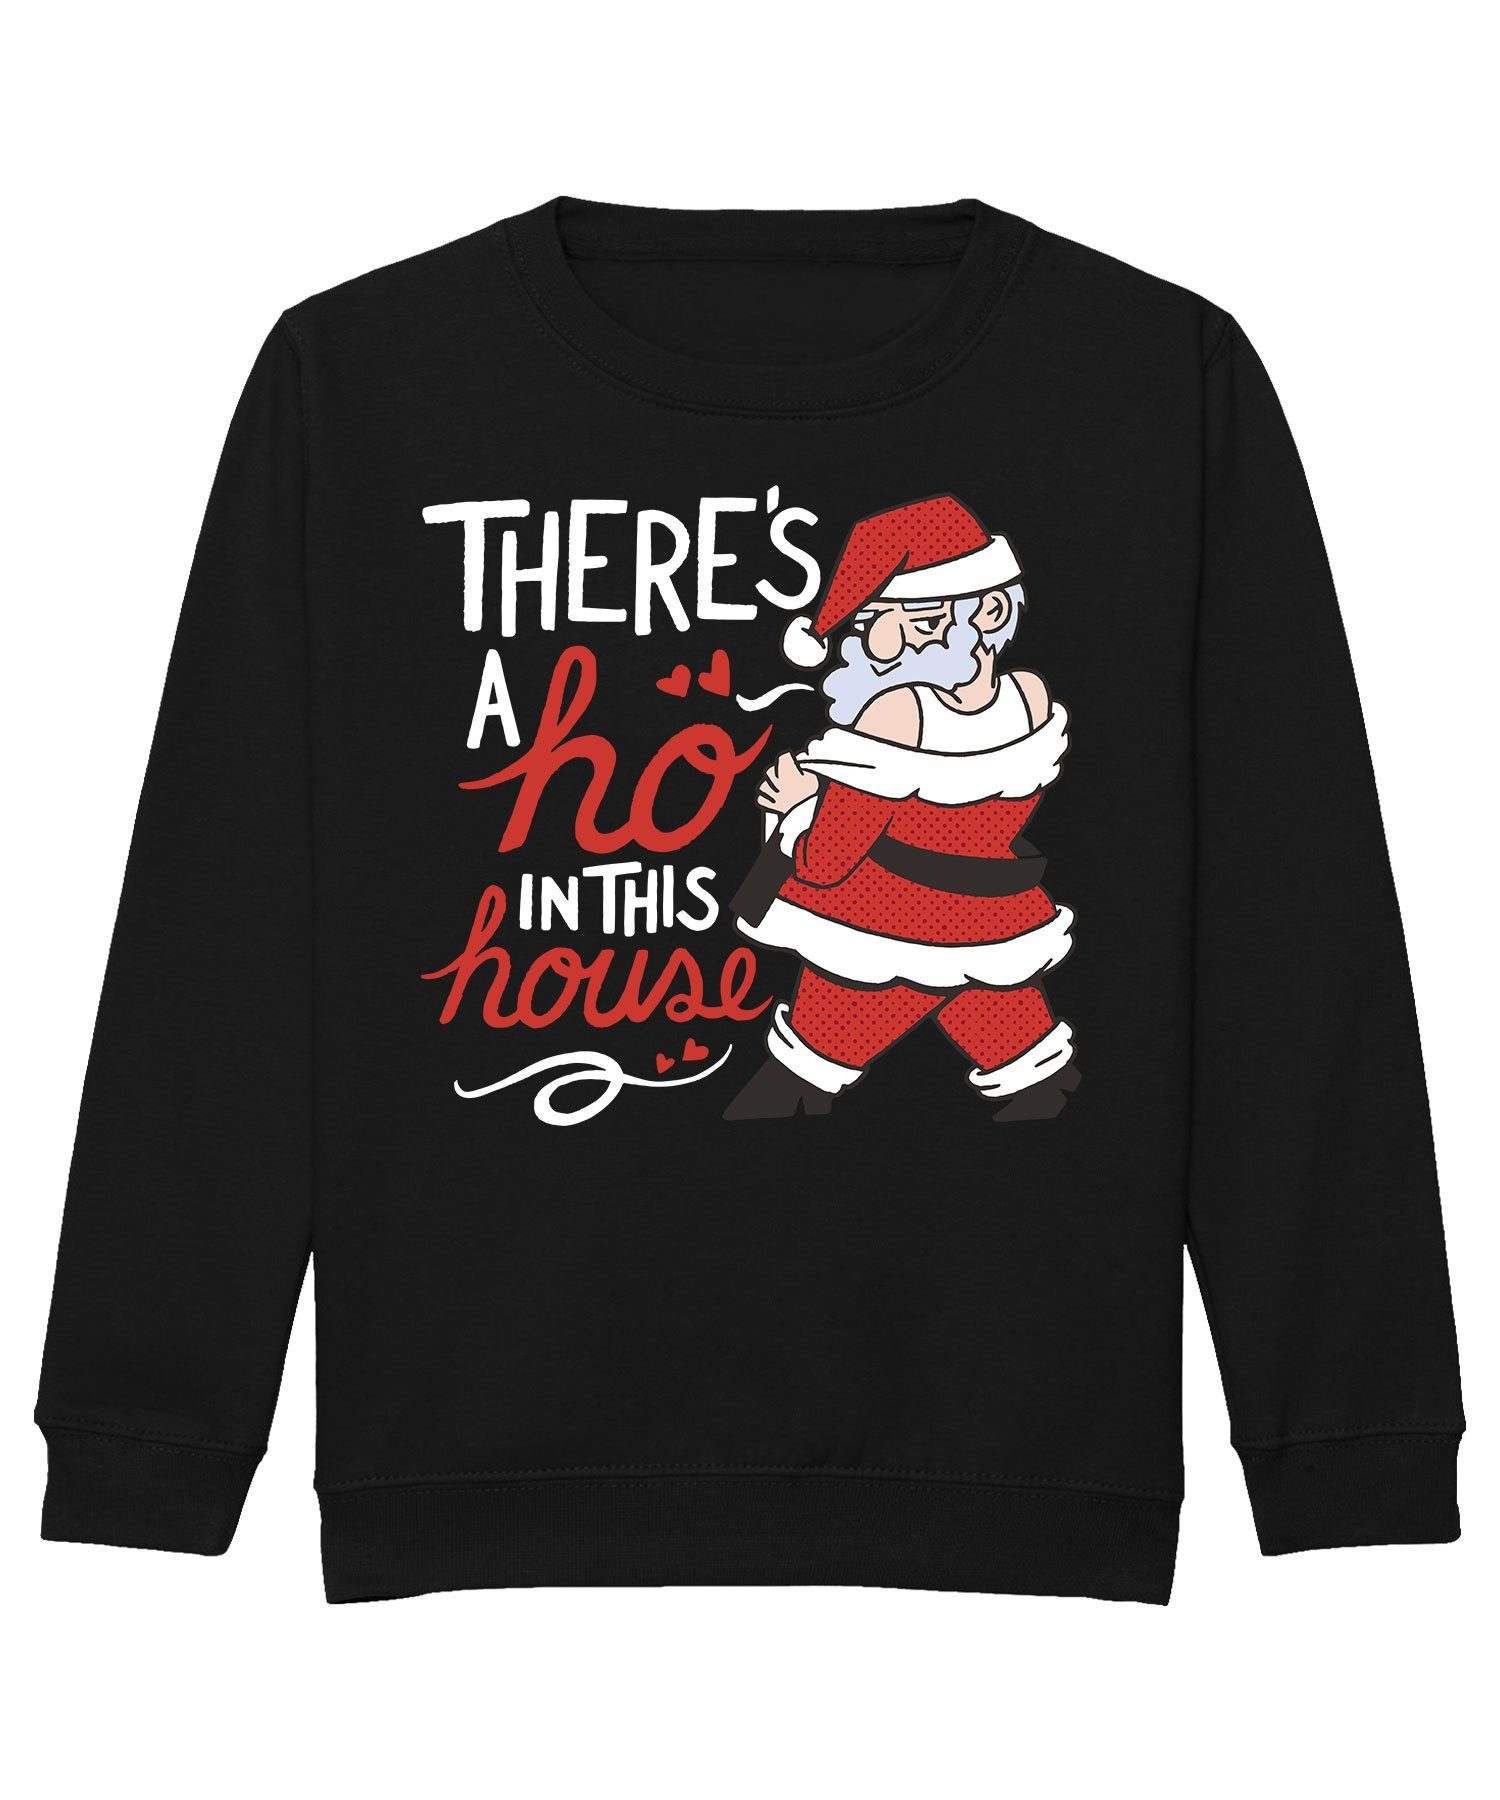 in Ho There's a house this lustig Sweatshirt (1-tlg) Sweat Weihnachtsmann Formatee Kinder Quattro Pullover